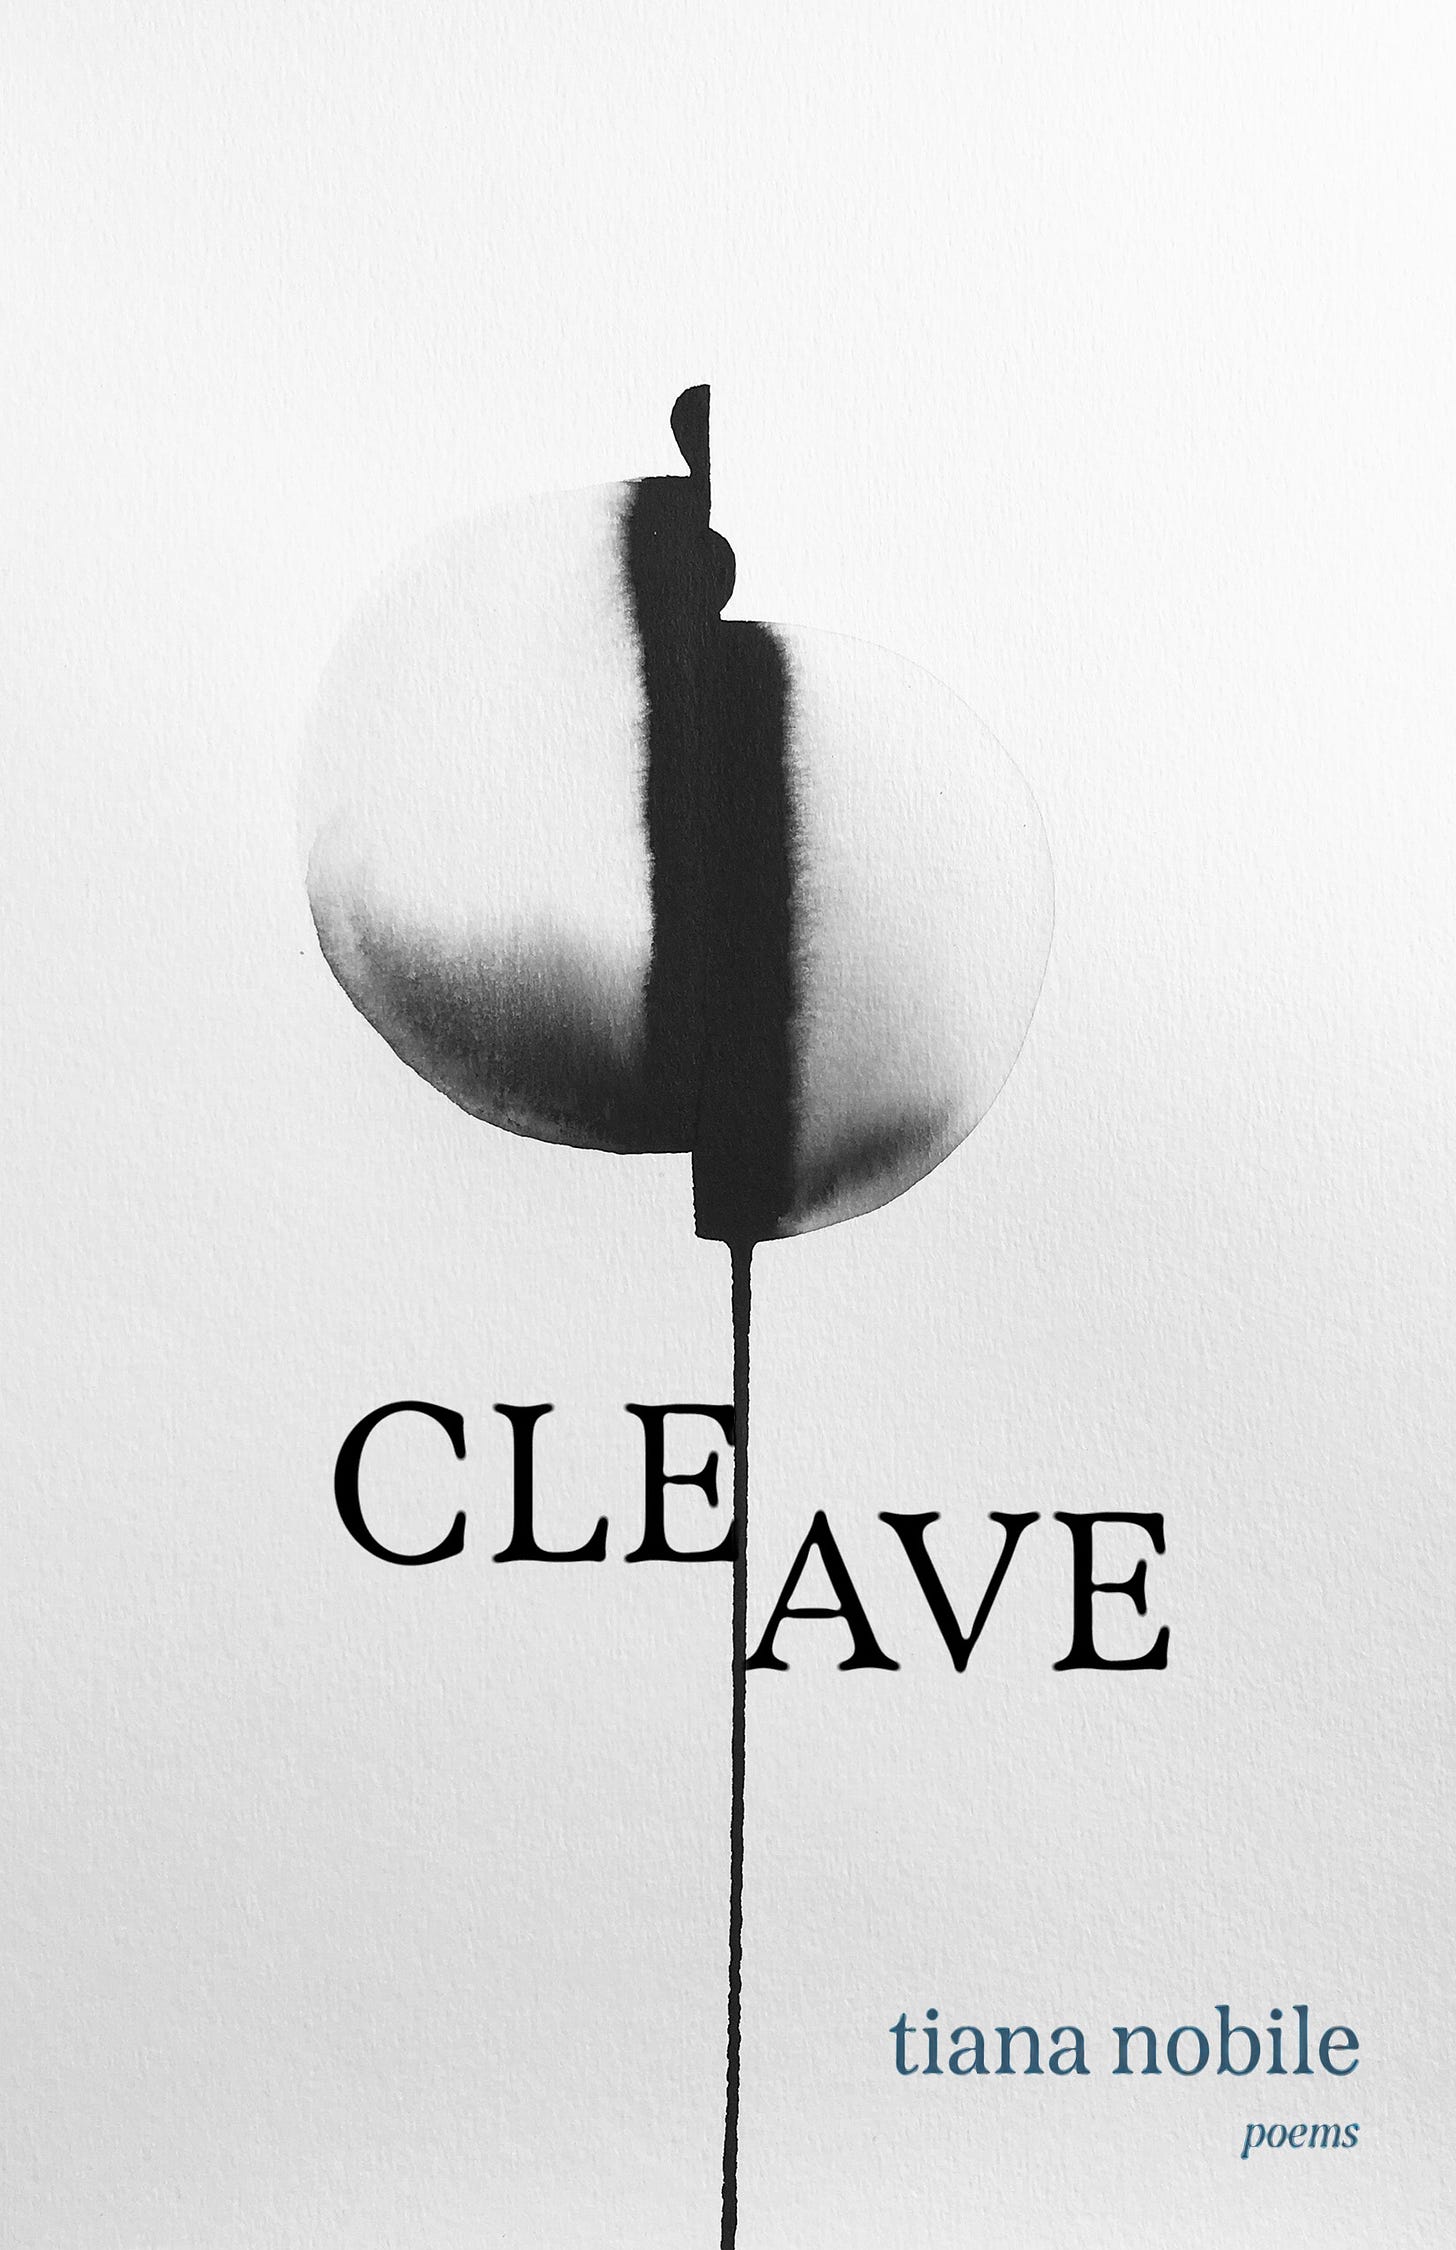 This is the book cover for Cleave by Tiana Nobile